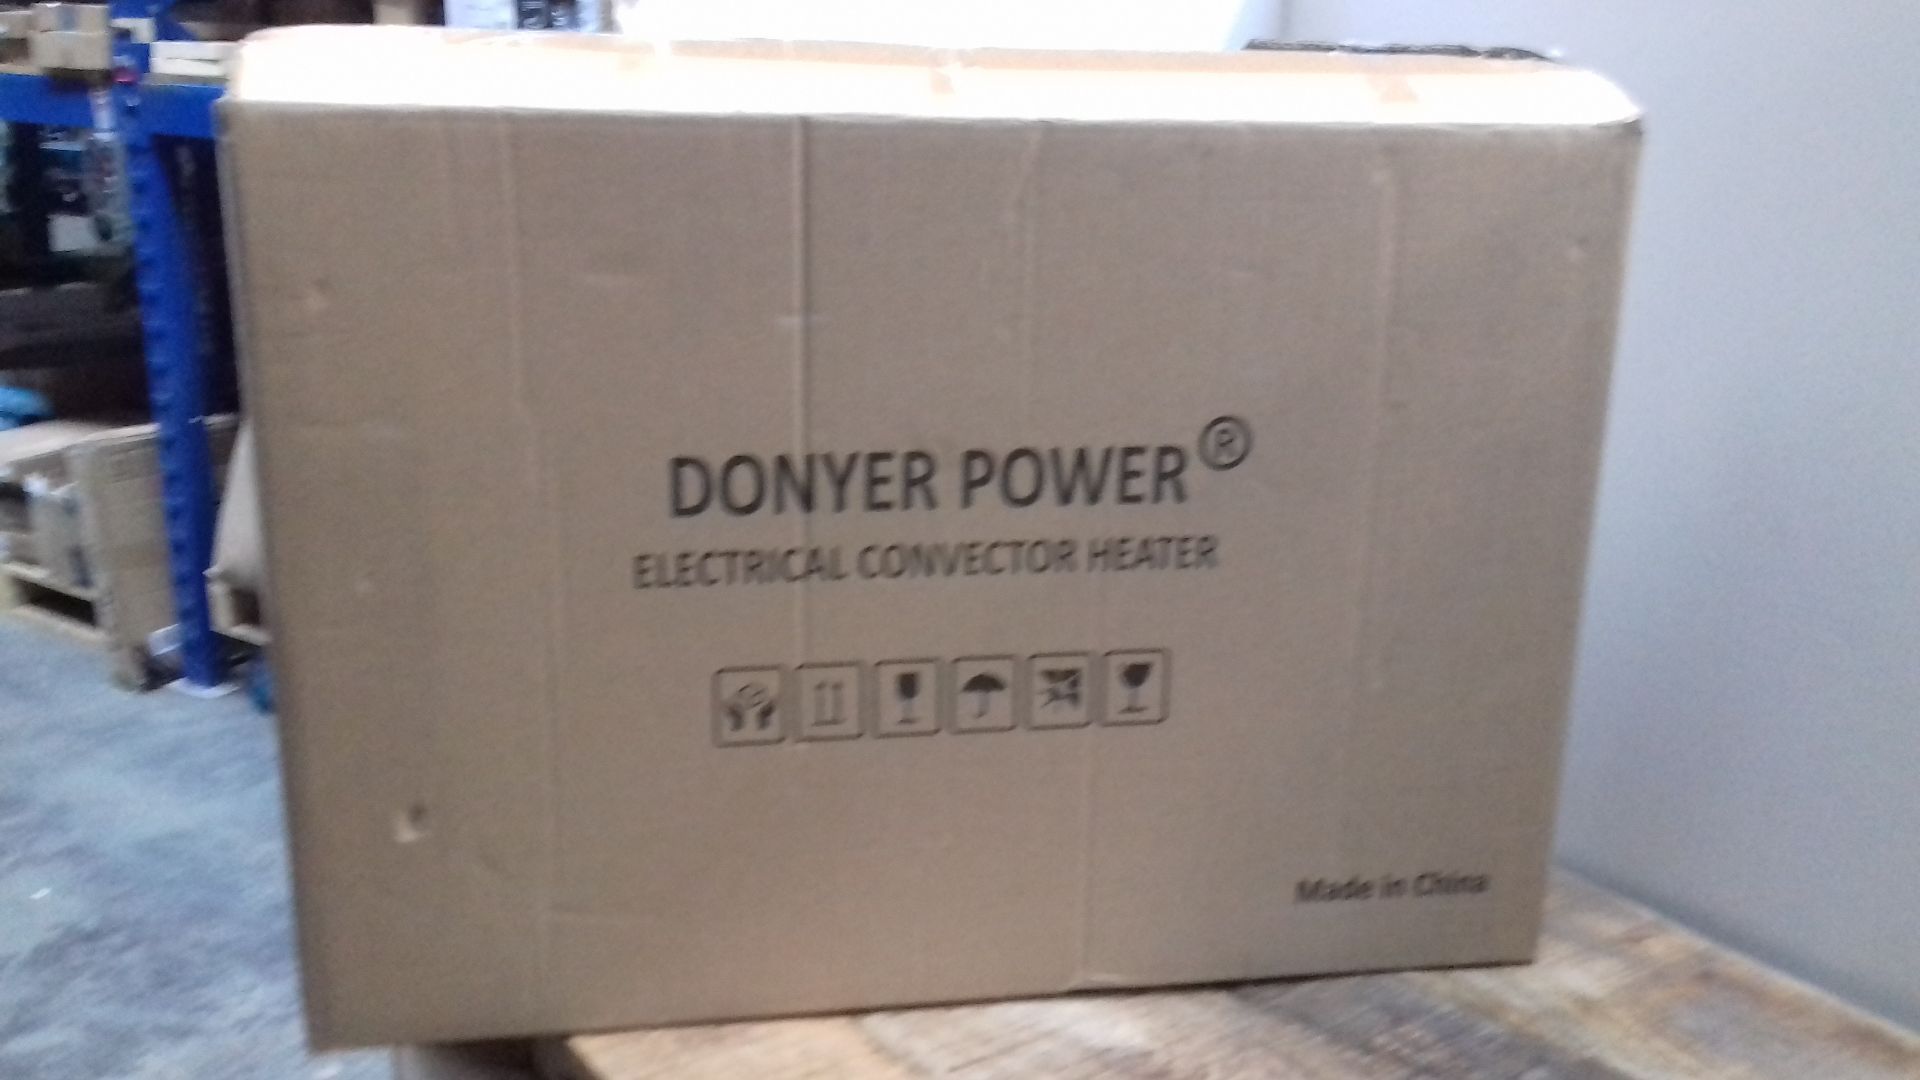 RRP £32.37 DONYER POWER Convector Heater with Adjustable Thermostat 3 Heat Settings - Image 2 of 2